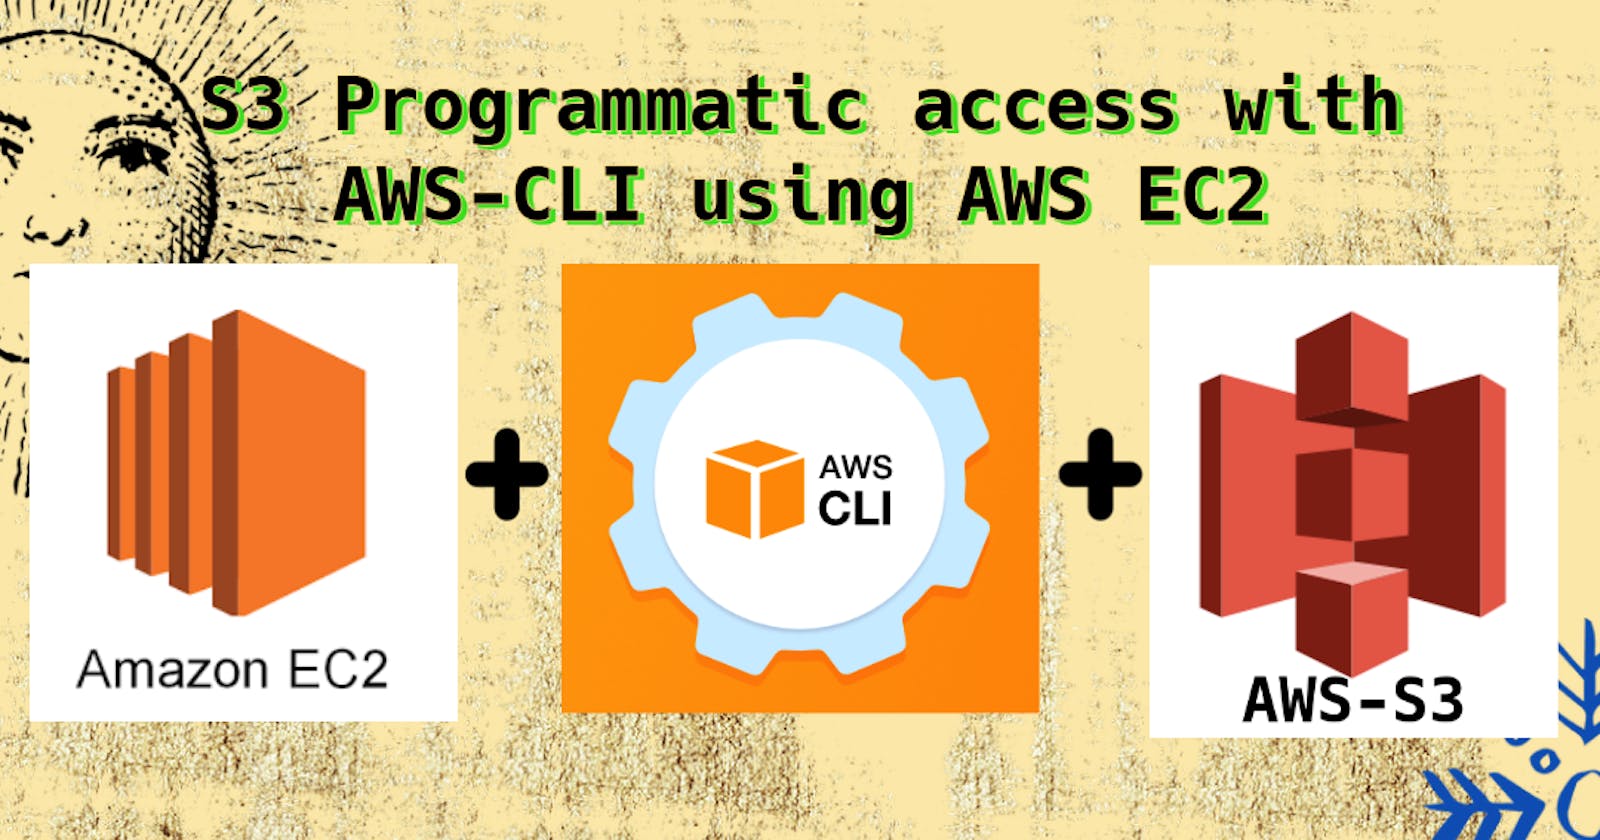 Day 43: S3 Programmatic access with AWS-CLI.